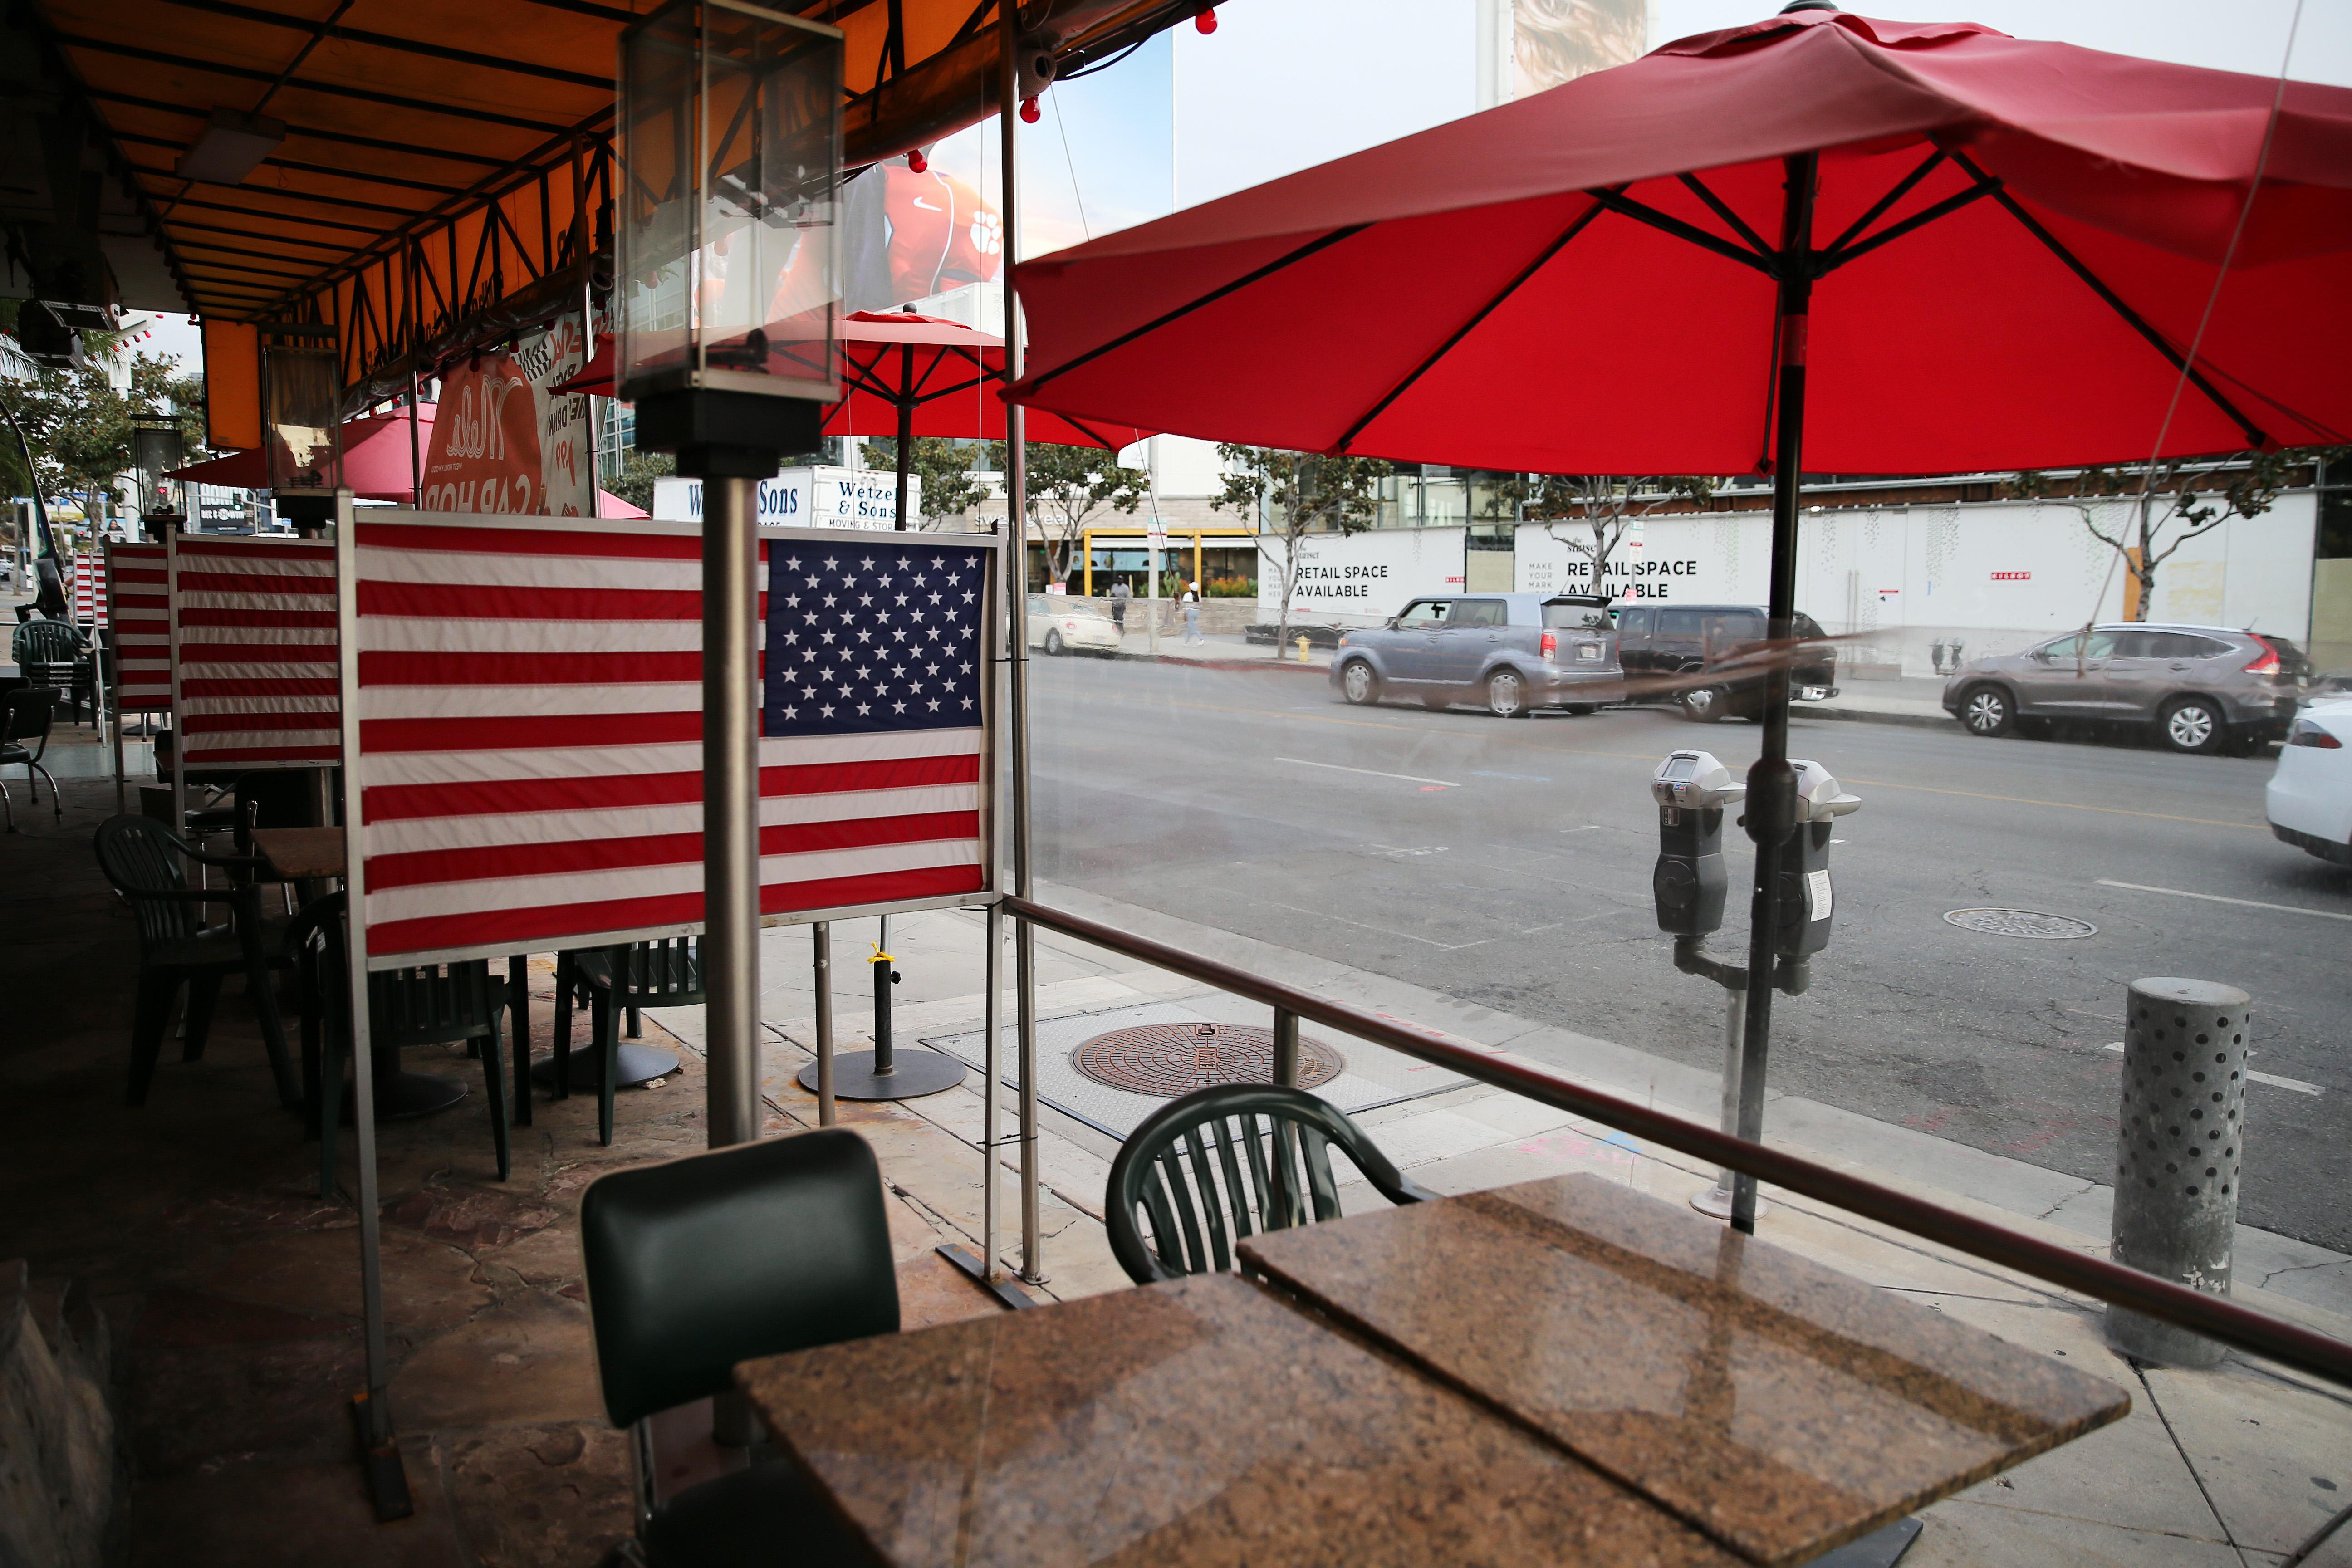 Empty outdoor dining tables with umbrellas and American flag dividers between them